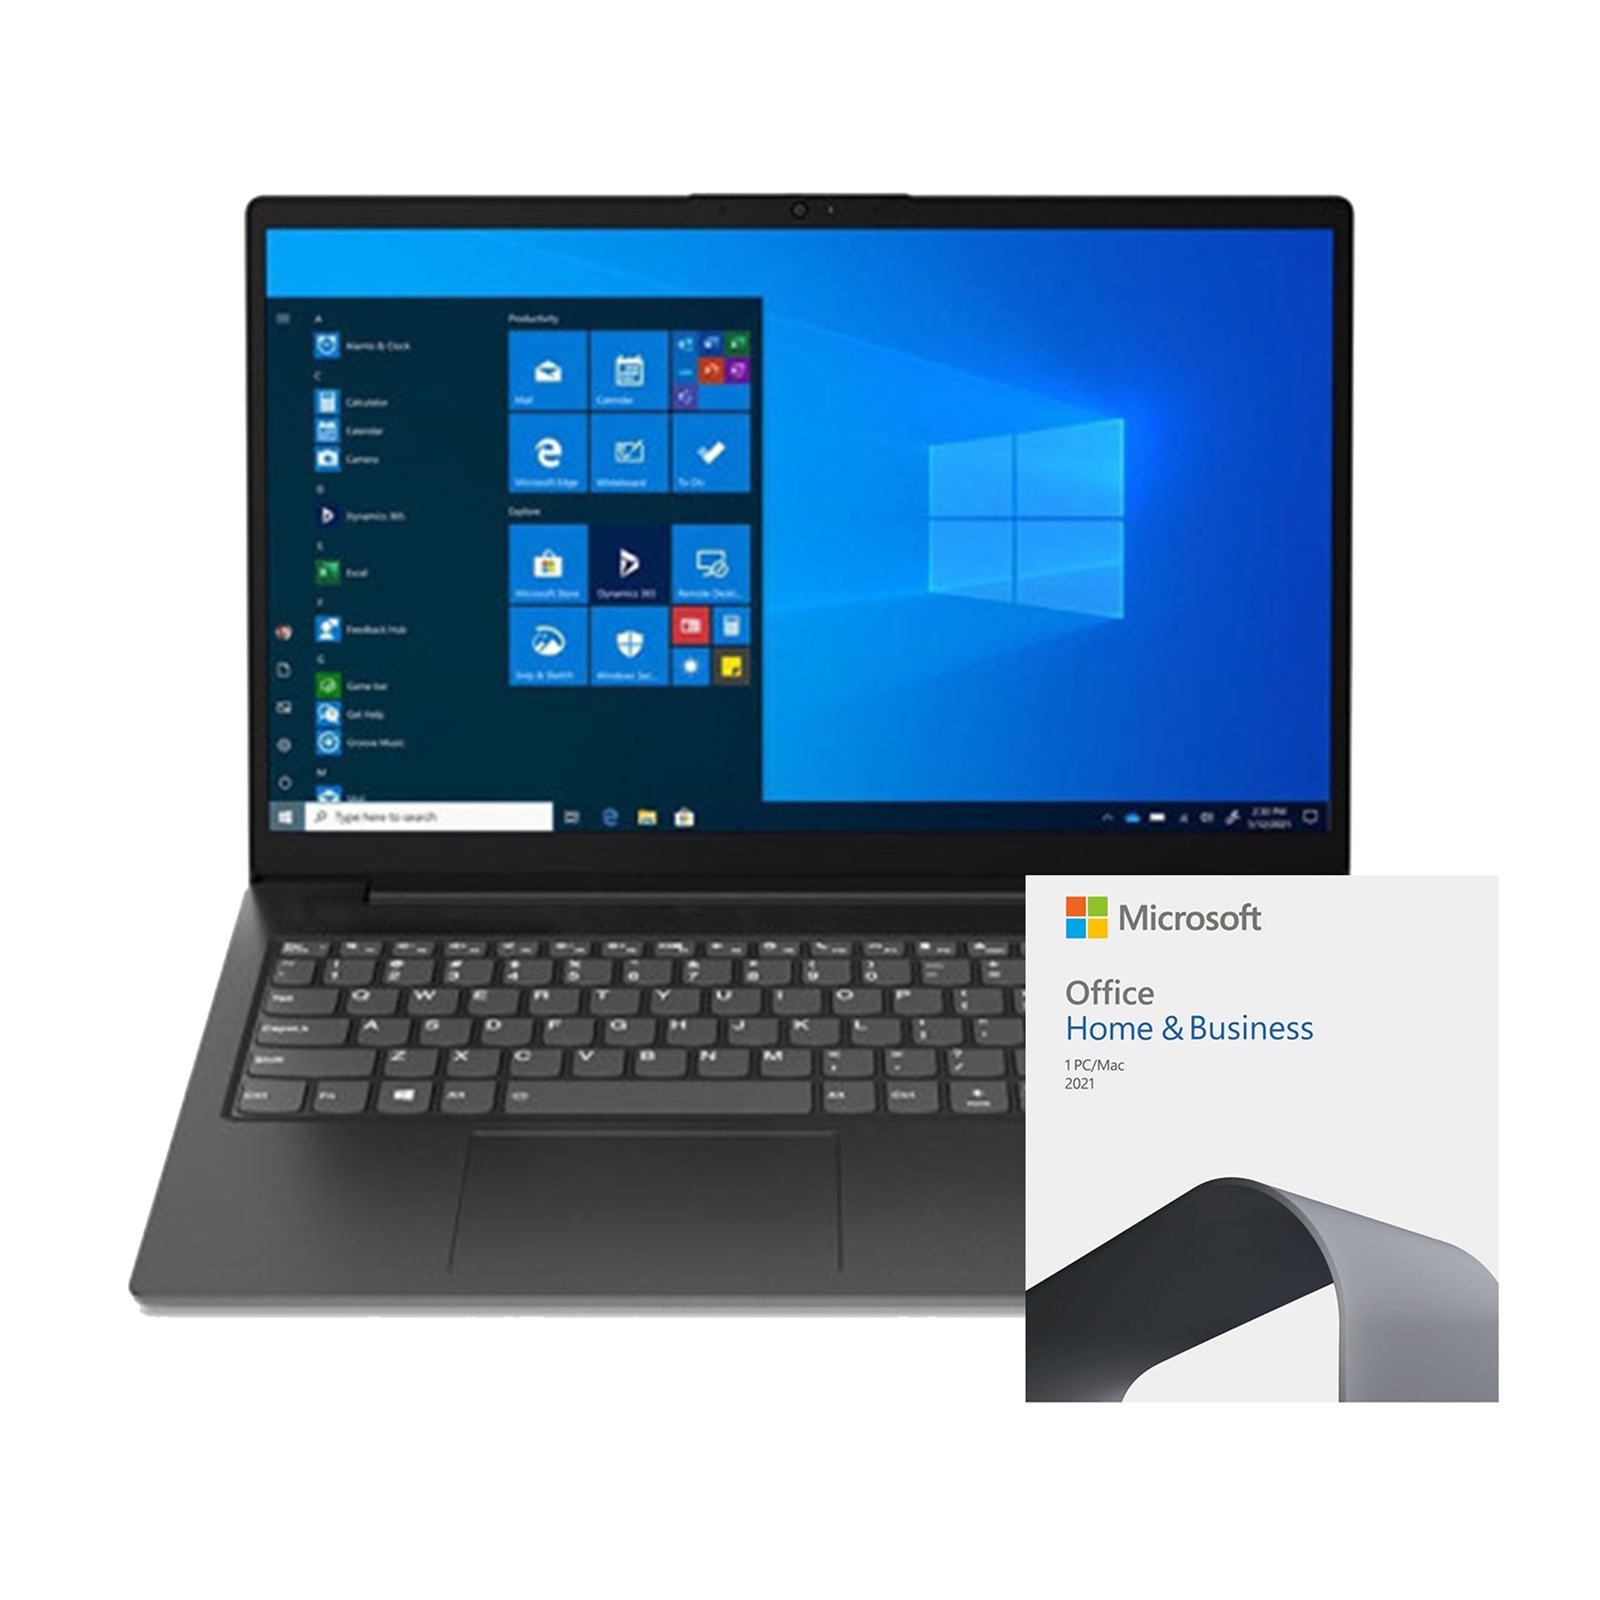 Lenovo V15 G2 ALC 82KD Laptop, 15.6 Inch Full HD 1080p Screen, AMD Ryzen 3 5300U 5th Gen, 8GB RAM, 256GB SSD, AMD Radeon Graphics, Windows 11 Home and Office Home and Business included